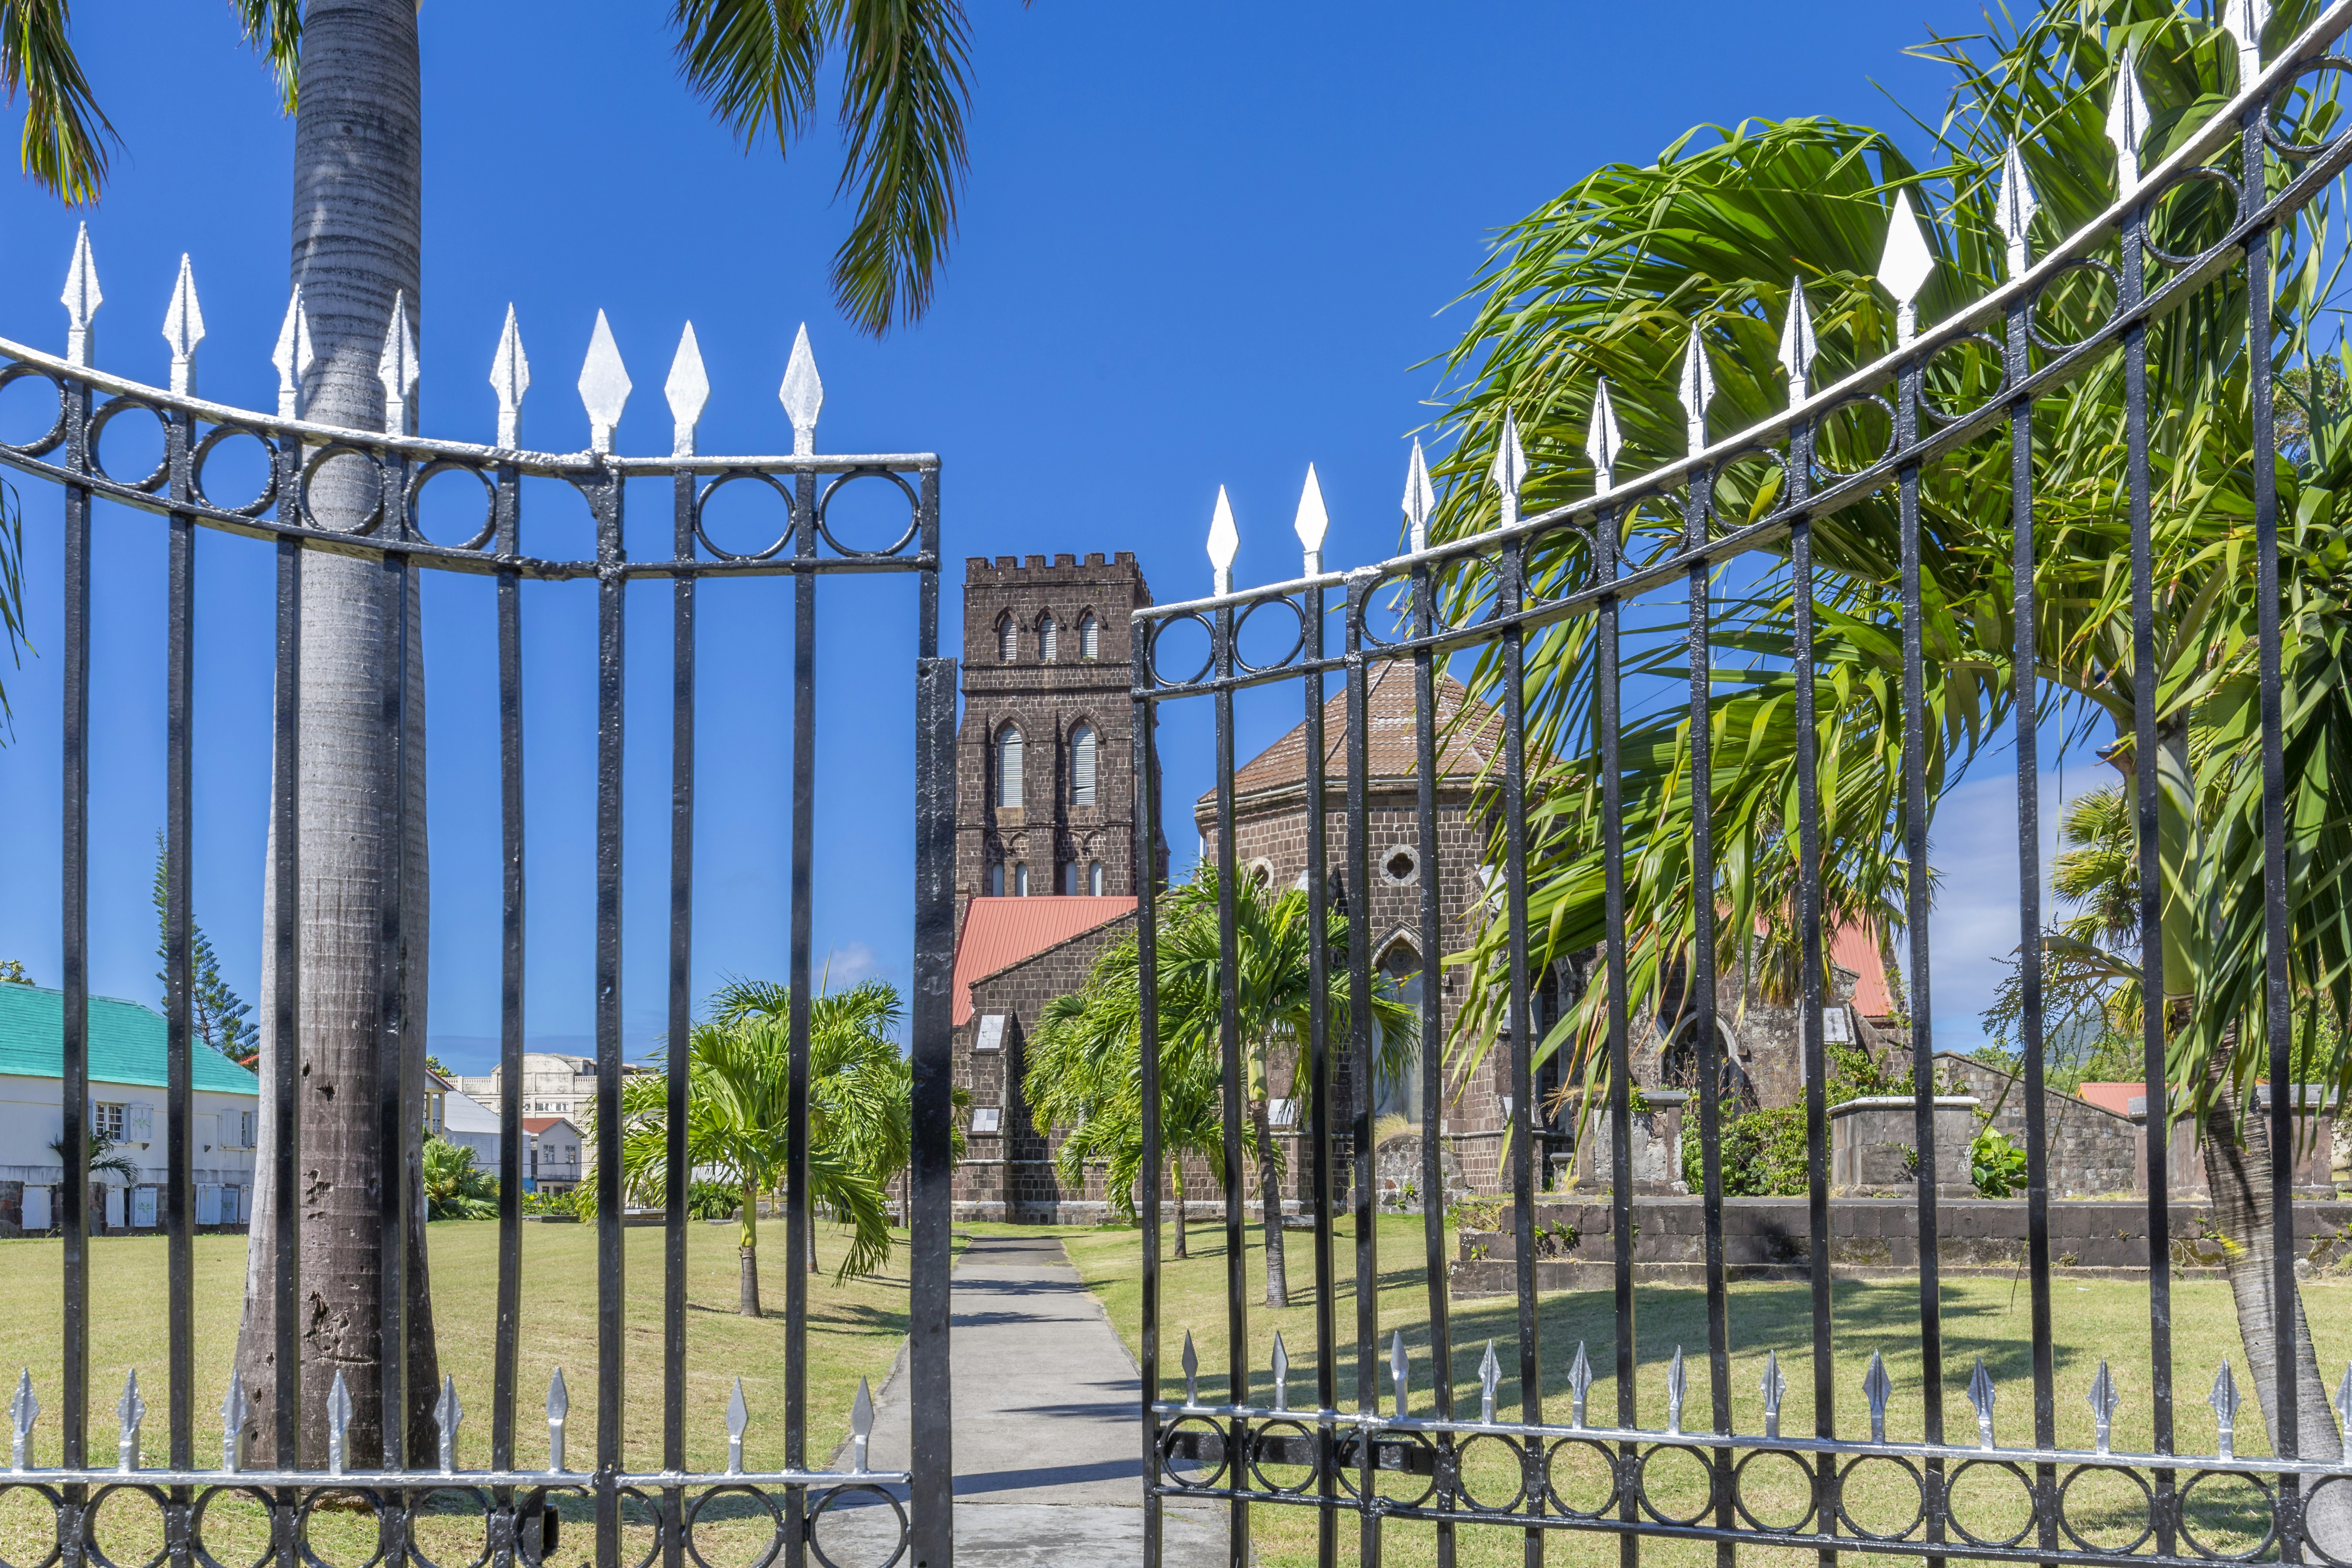 Iron gates are partially open in front of an old stone church